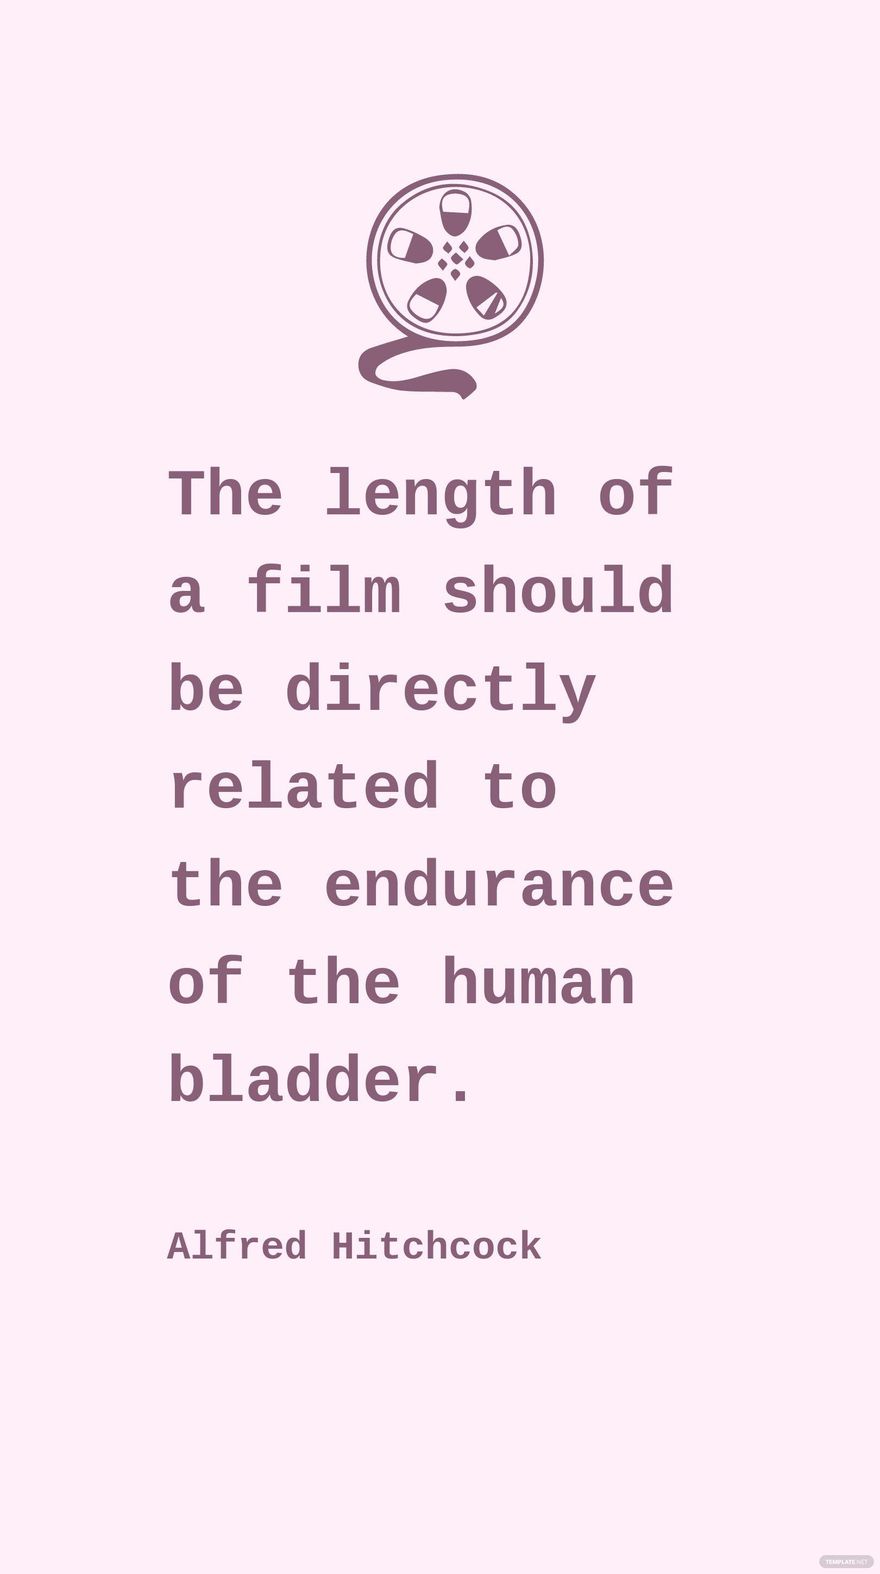 Free Alfred Hitchcock - The length of a film should be directly related to the endurance of the human bladder. in JPG